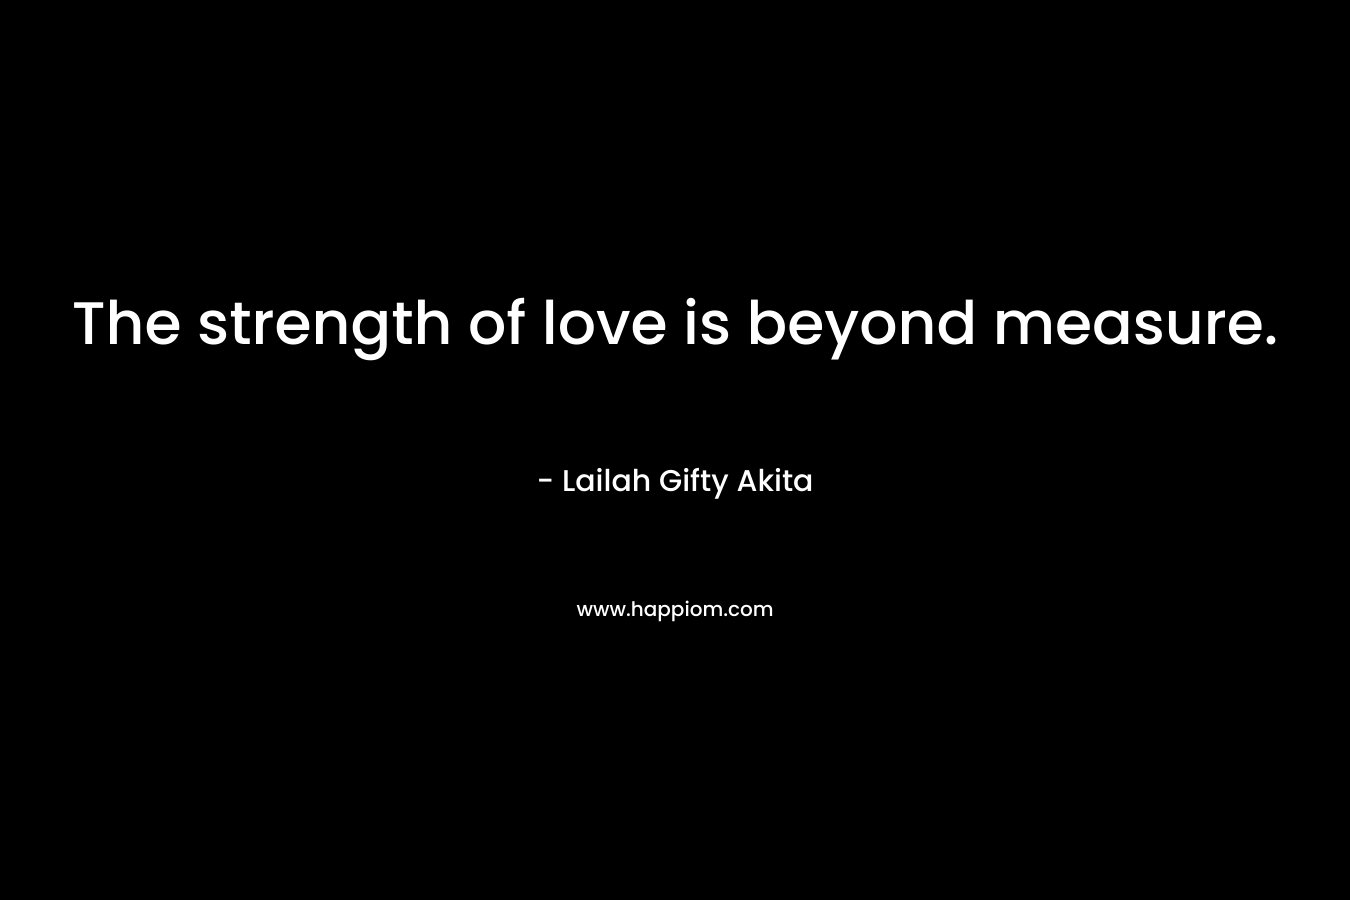 The strength of love is beyond measure.